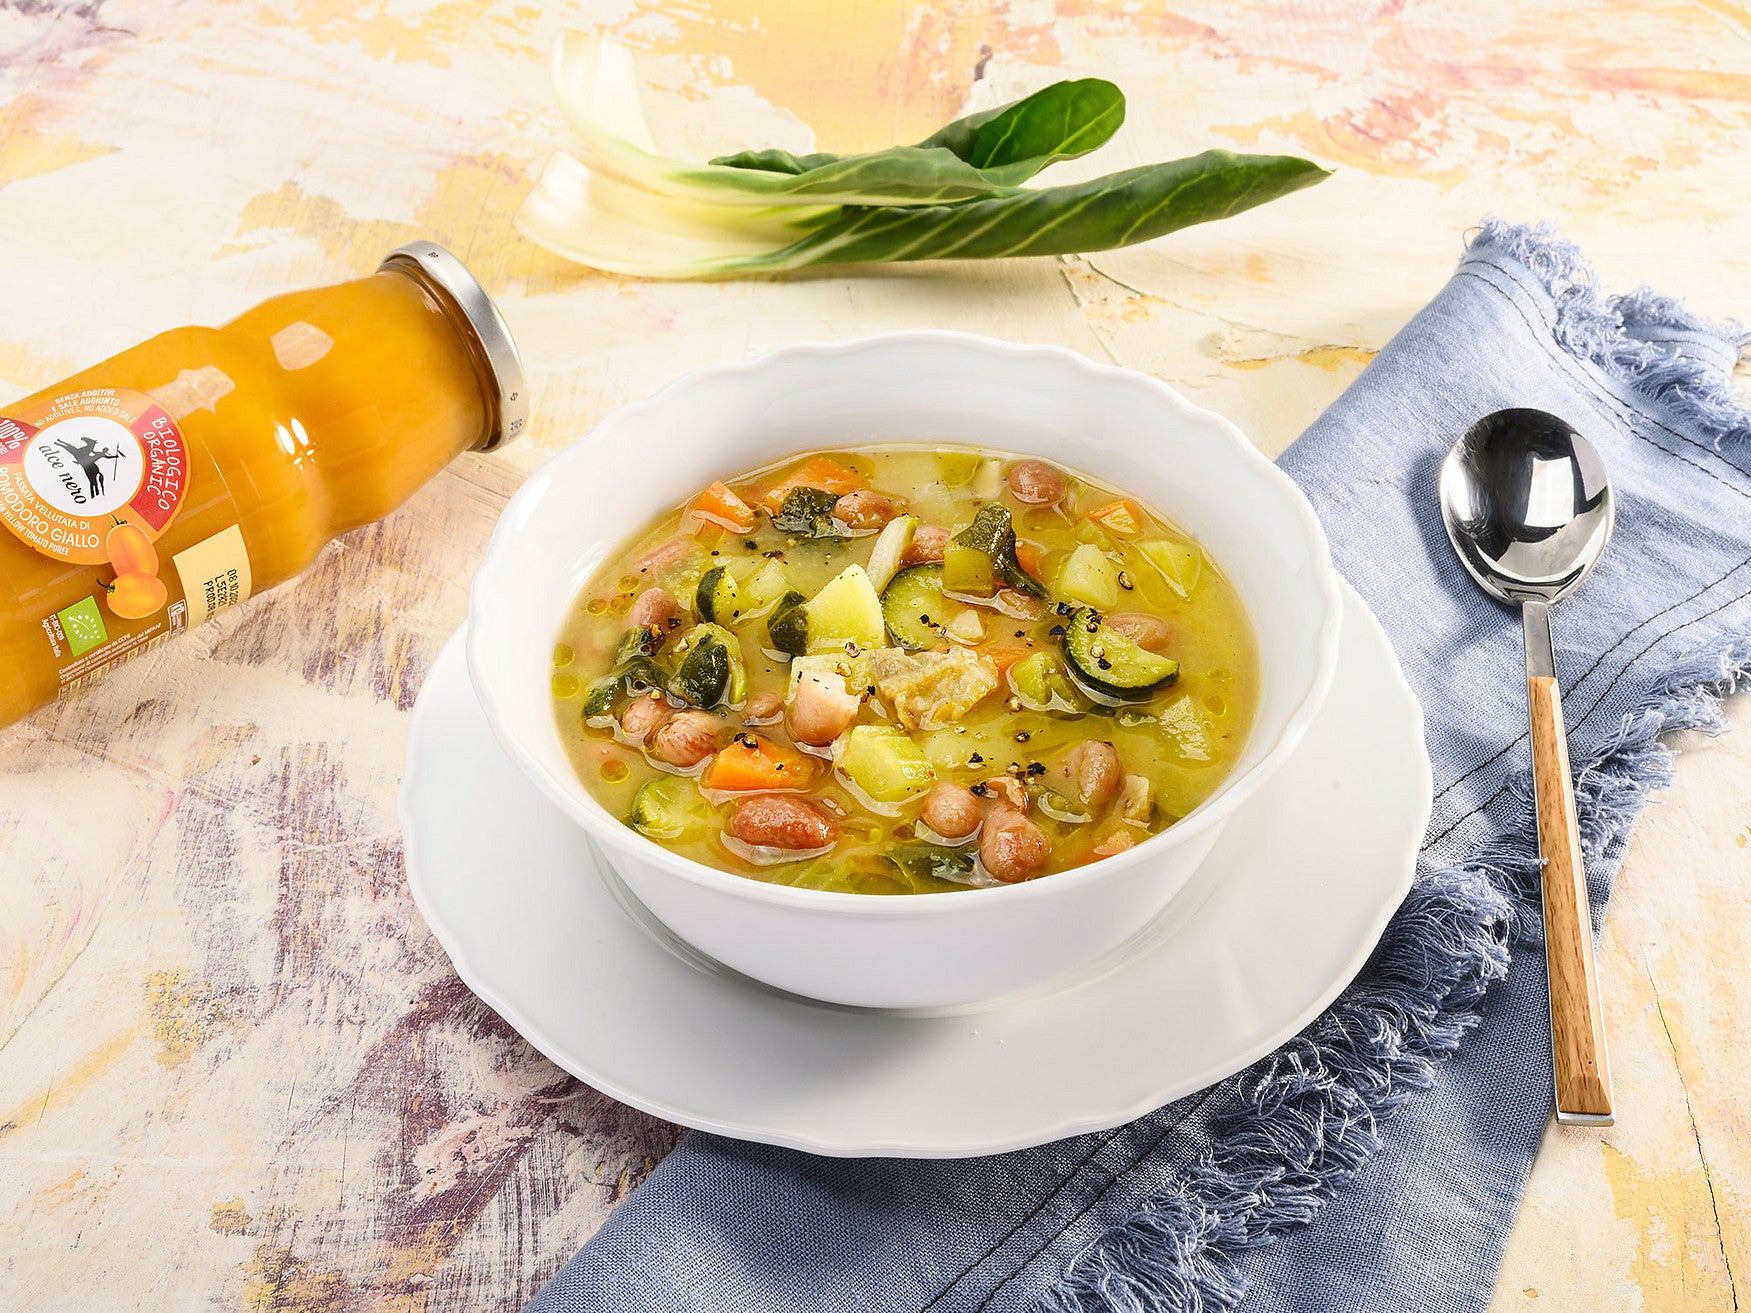 Borlotti bean soup with vegetables and smooth yellow tomato purée